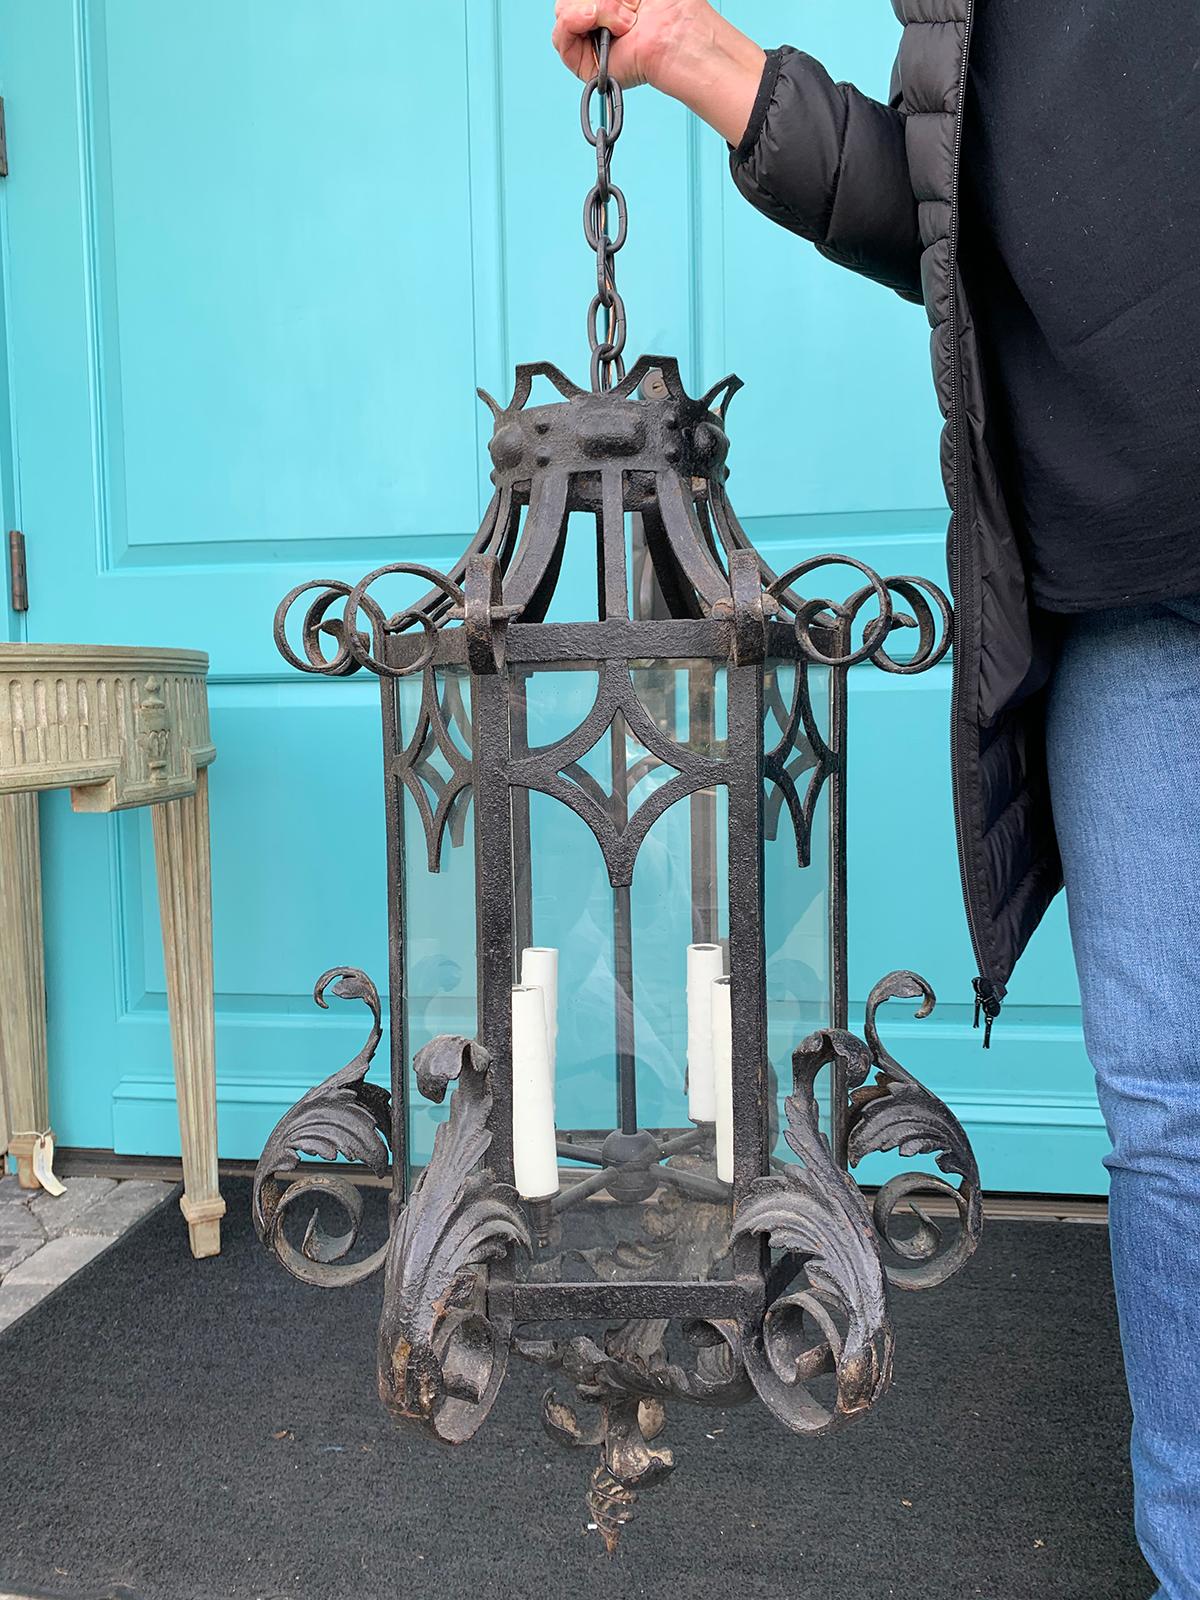 Late 19th-early 20th century iron lantern with scroll detail
New wiring.